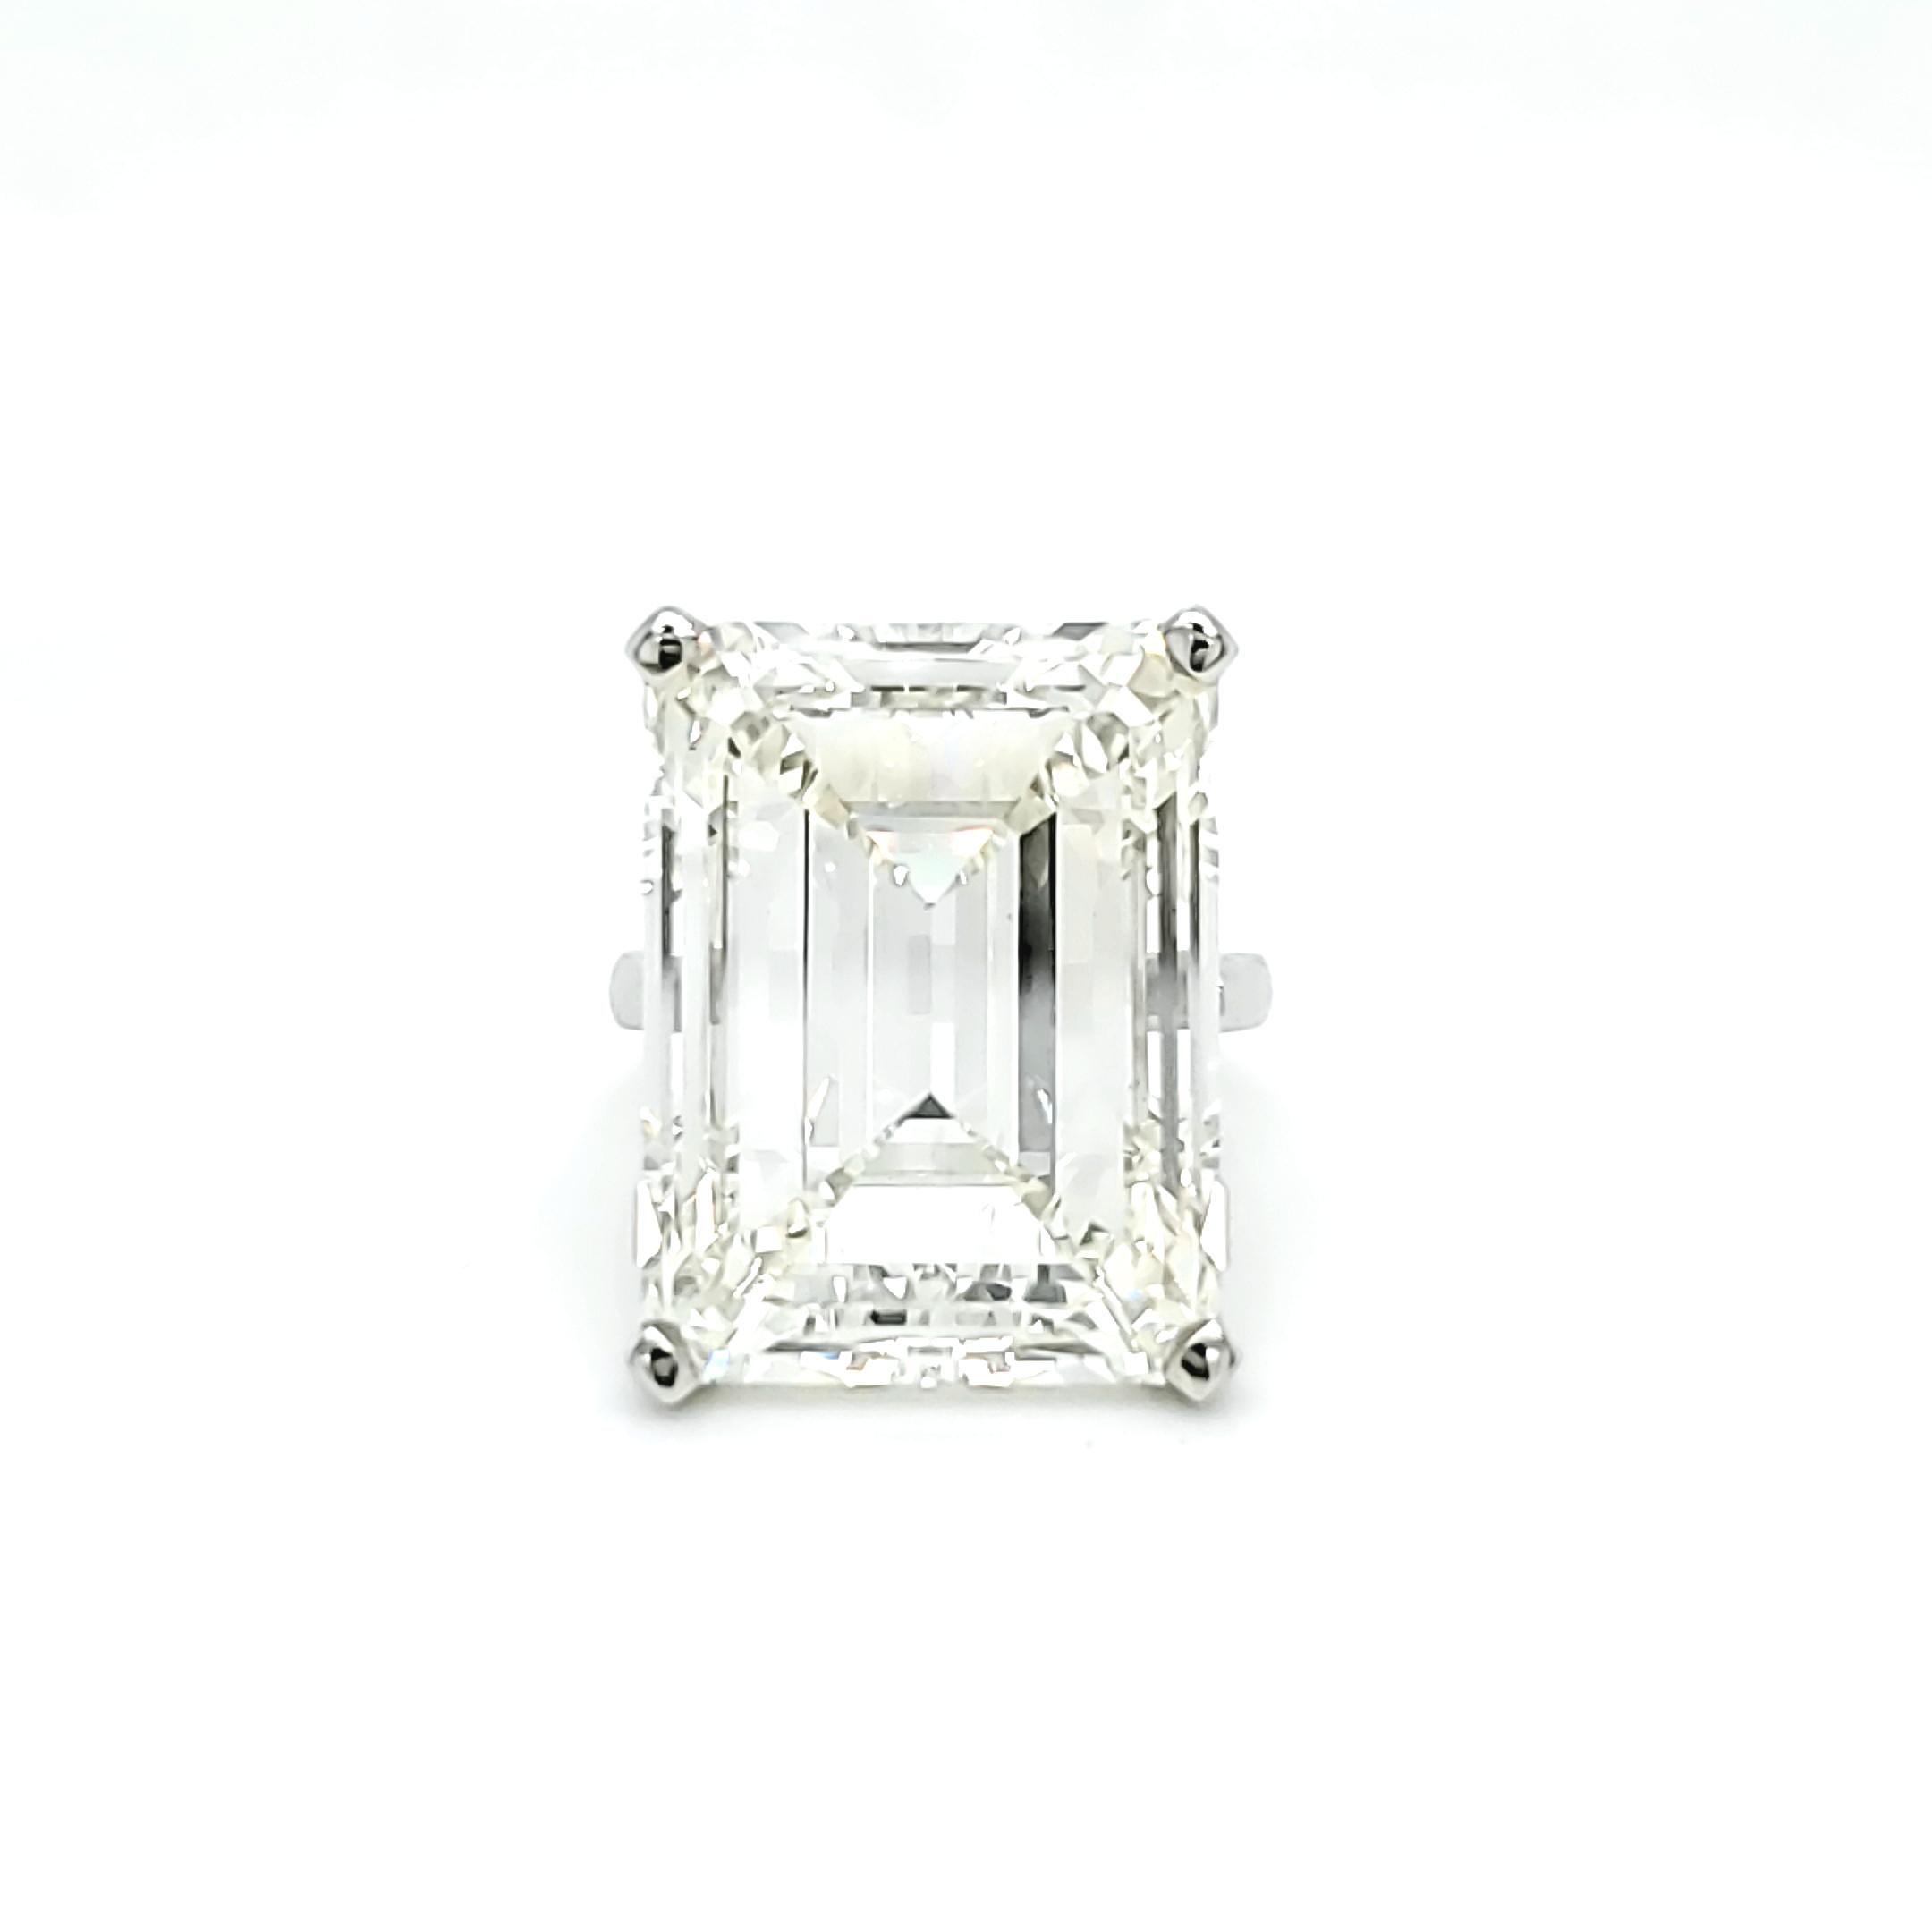 GIA certified 30.39 carat J color VS2 Clarity Emerald Cut Diamond. Set in a handmade solitaire band. Finger size is currently 6.5 but can be adjusted as needed. We can include a setting of your choice for this item Up to $15,000 value. 